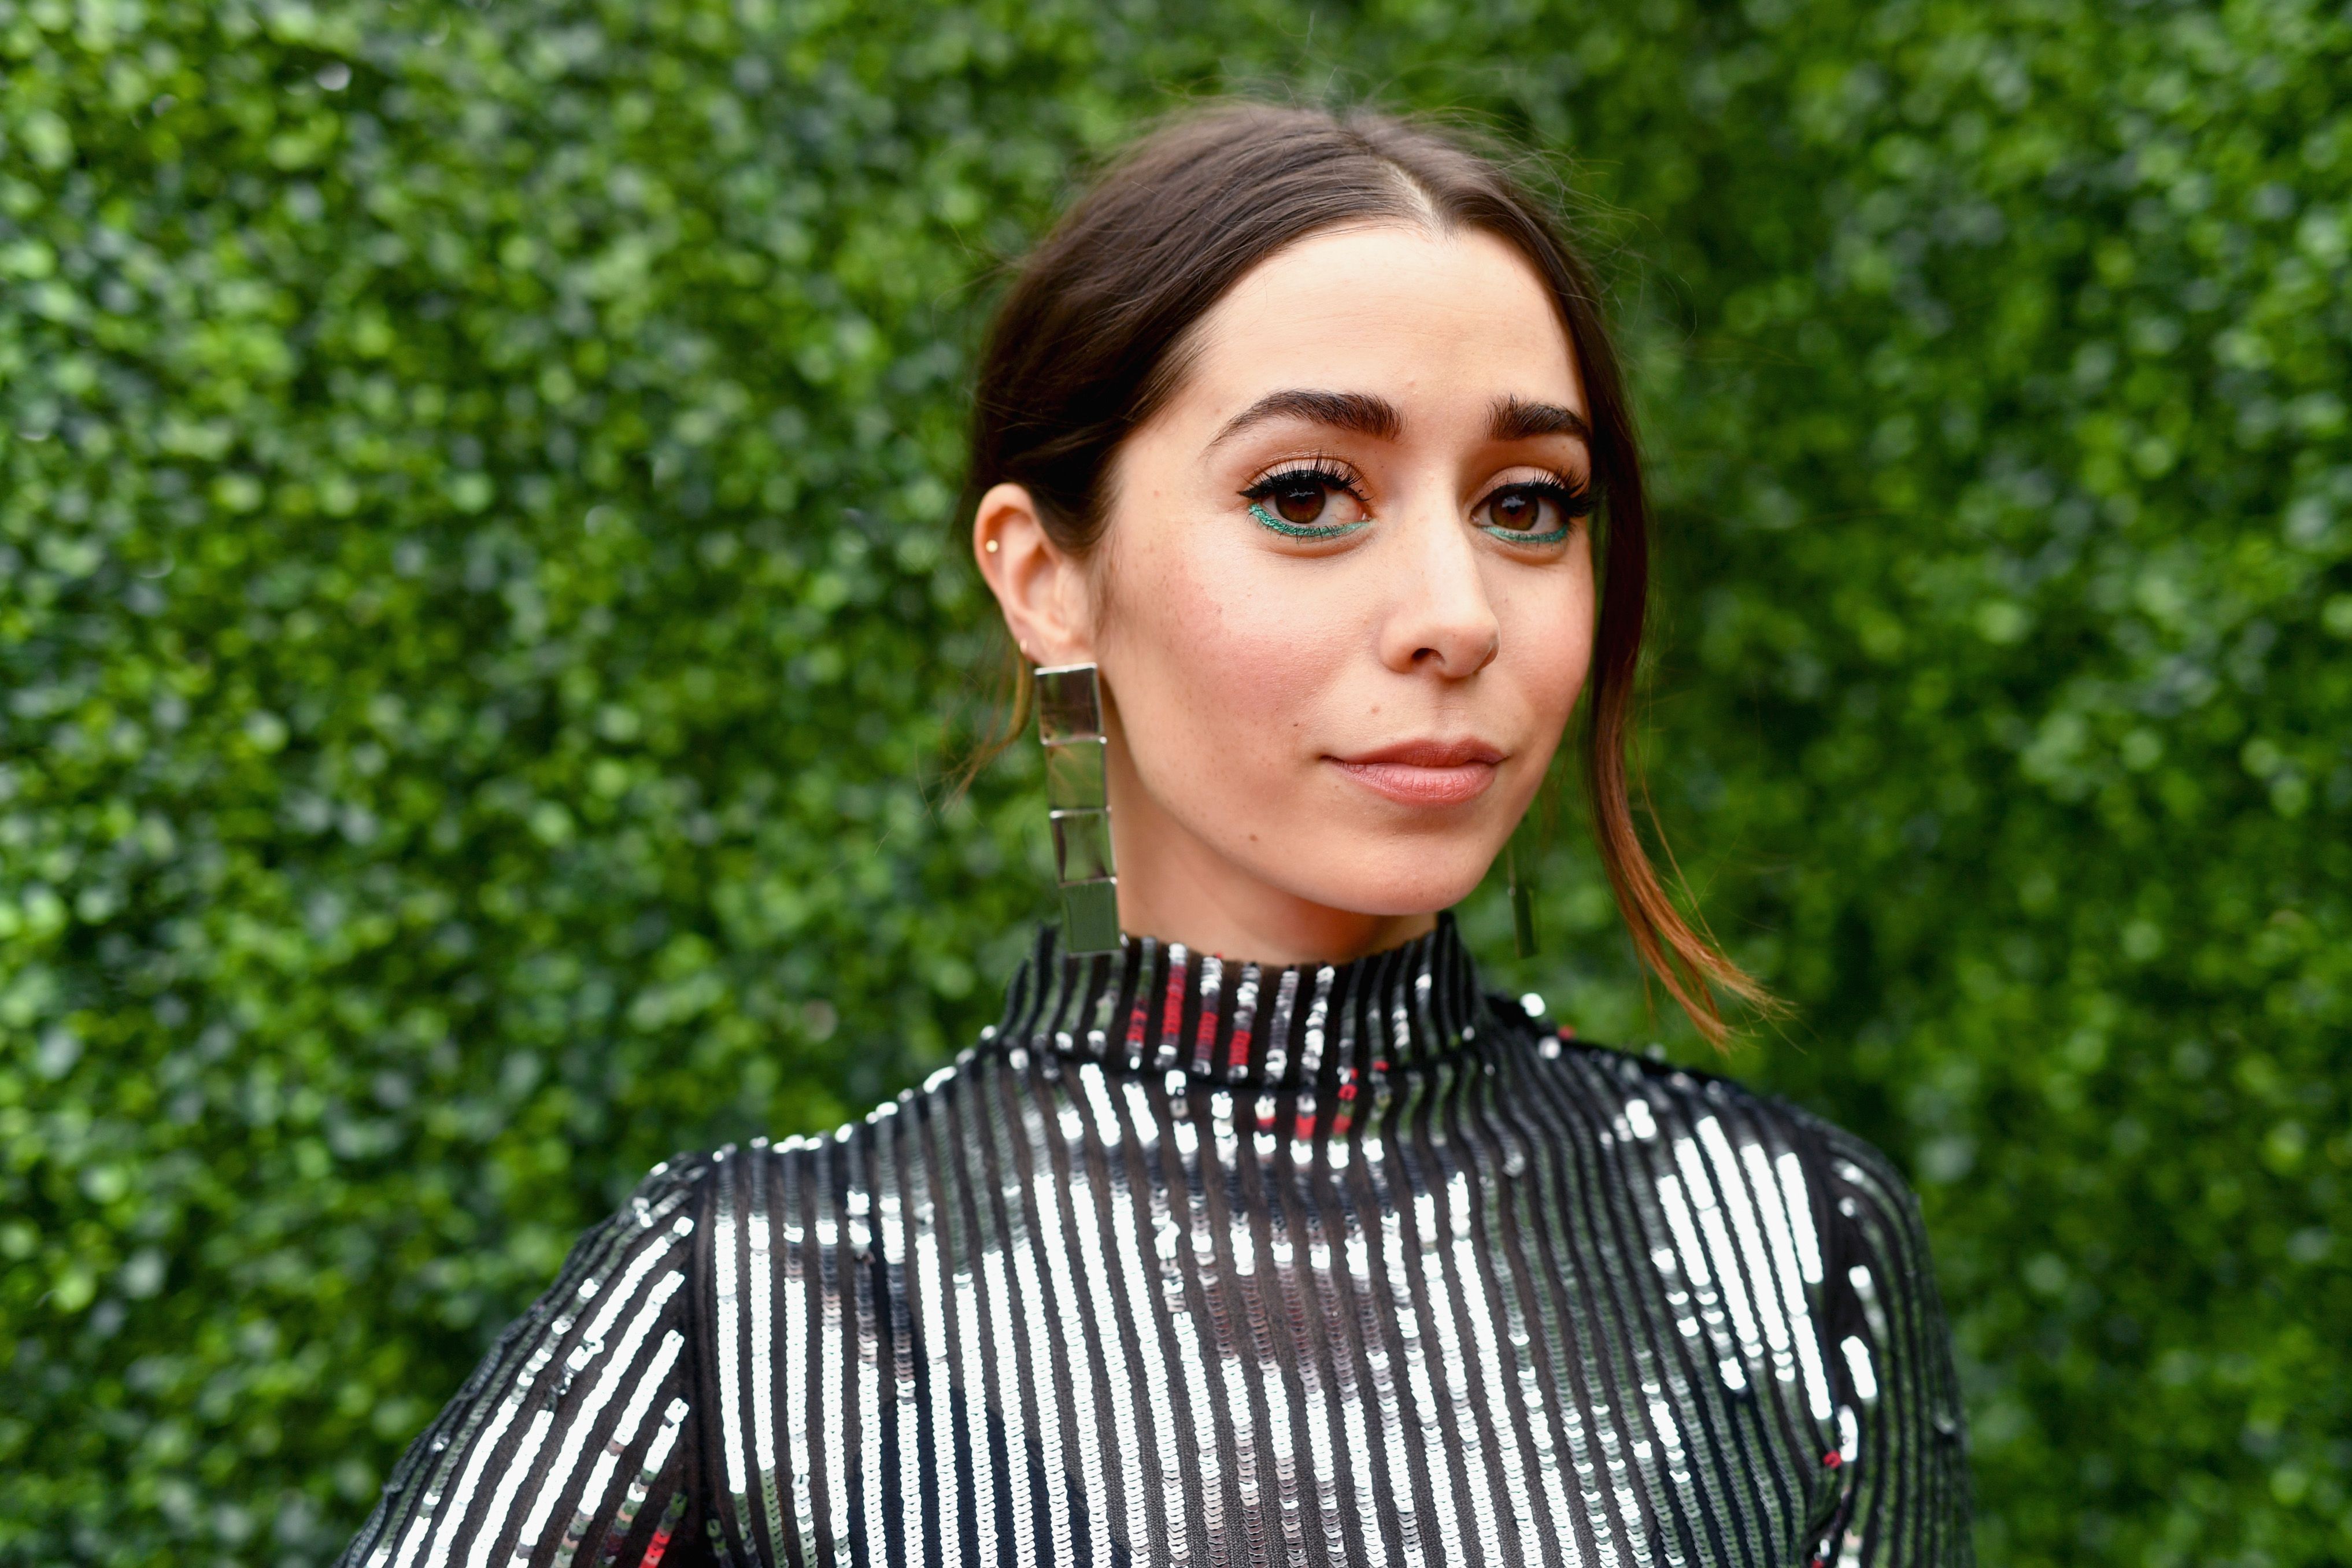 Cristin Milioti during the 2018 MTV Movie And TV Awards at Barker Hangar on June 16, 2018, in Santa Monica, California. | Source: Getty Images